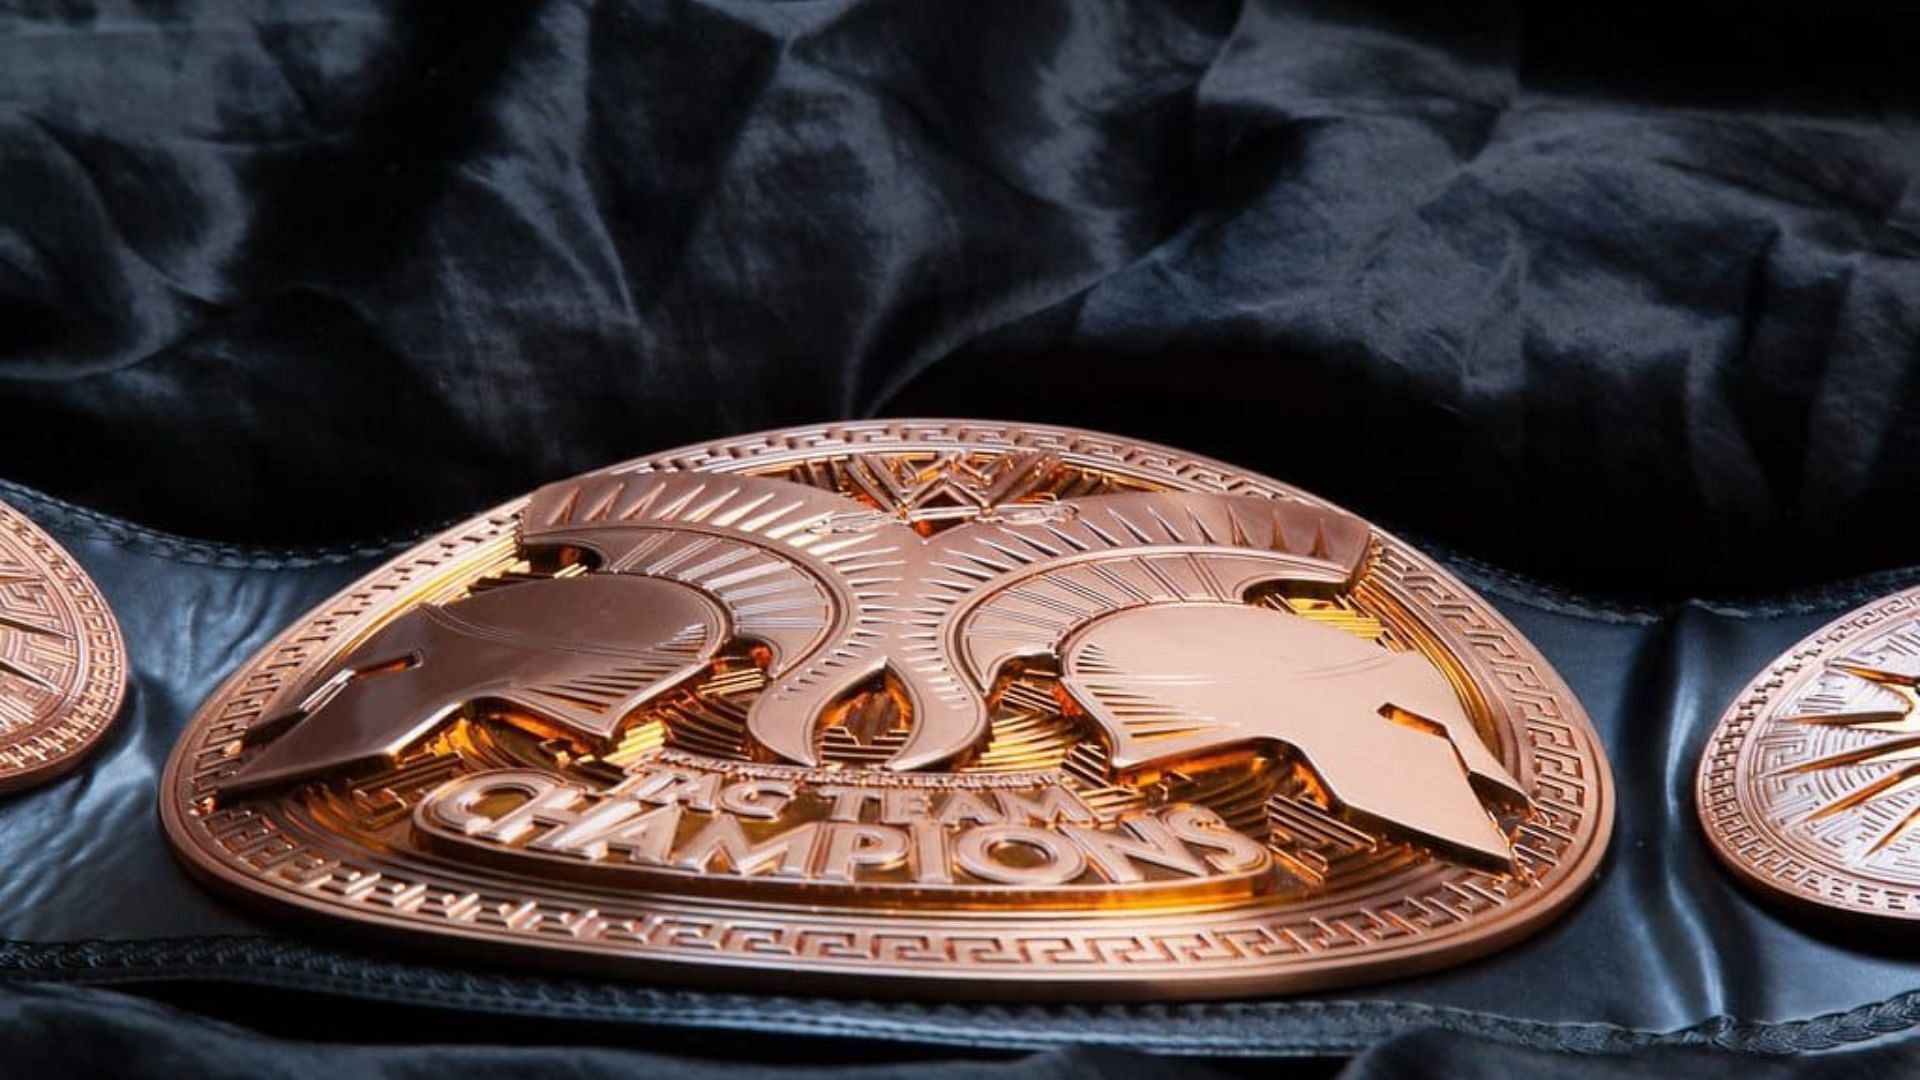 The WWE World Tag Team titles are one of the most sought after titles